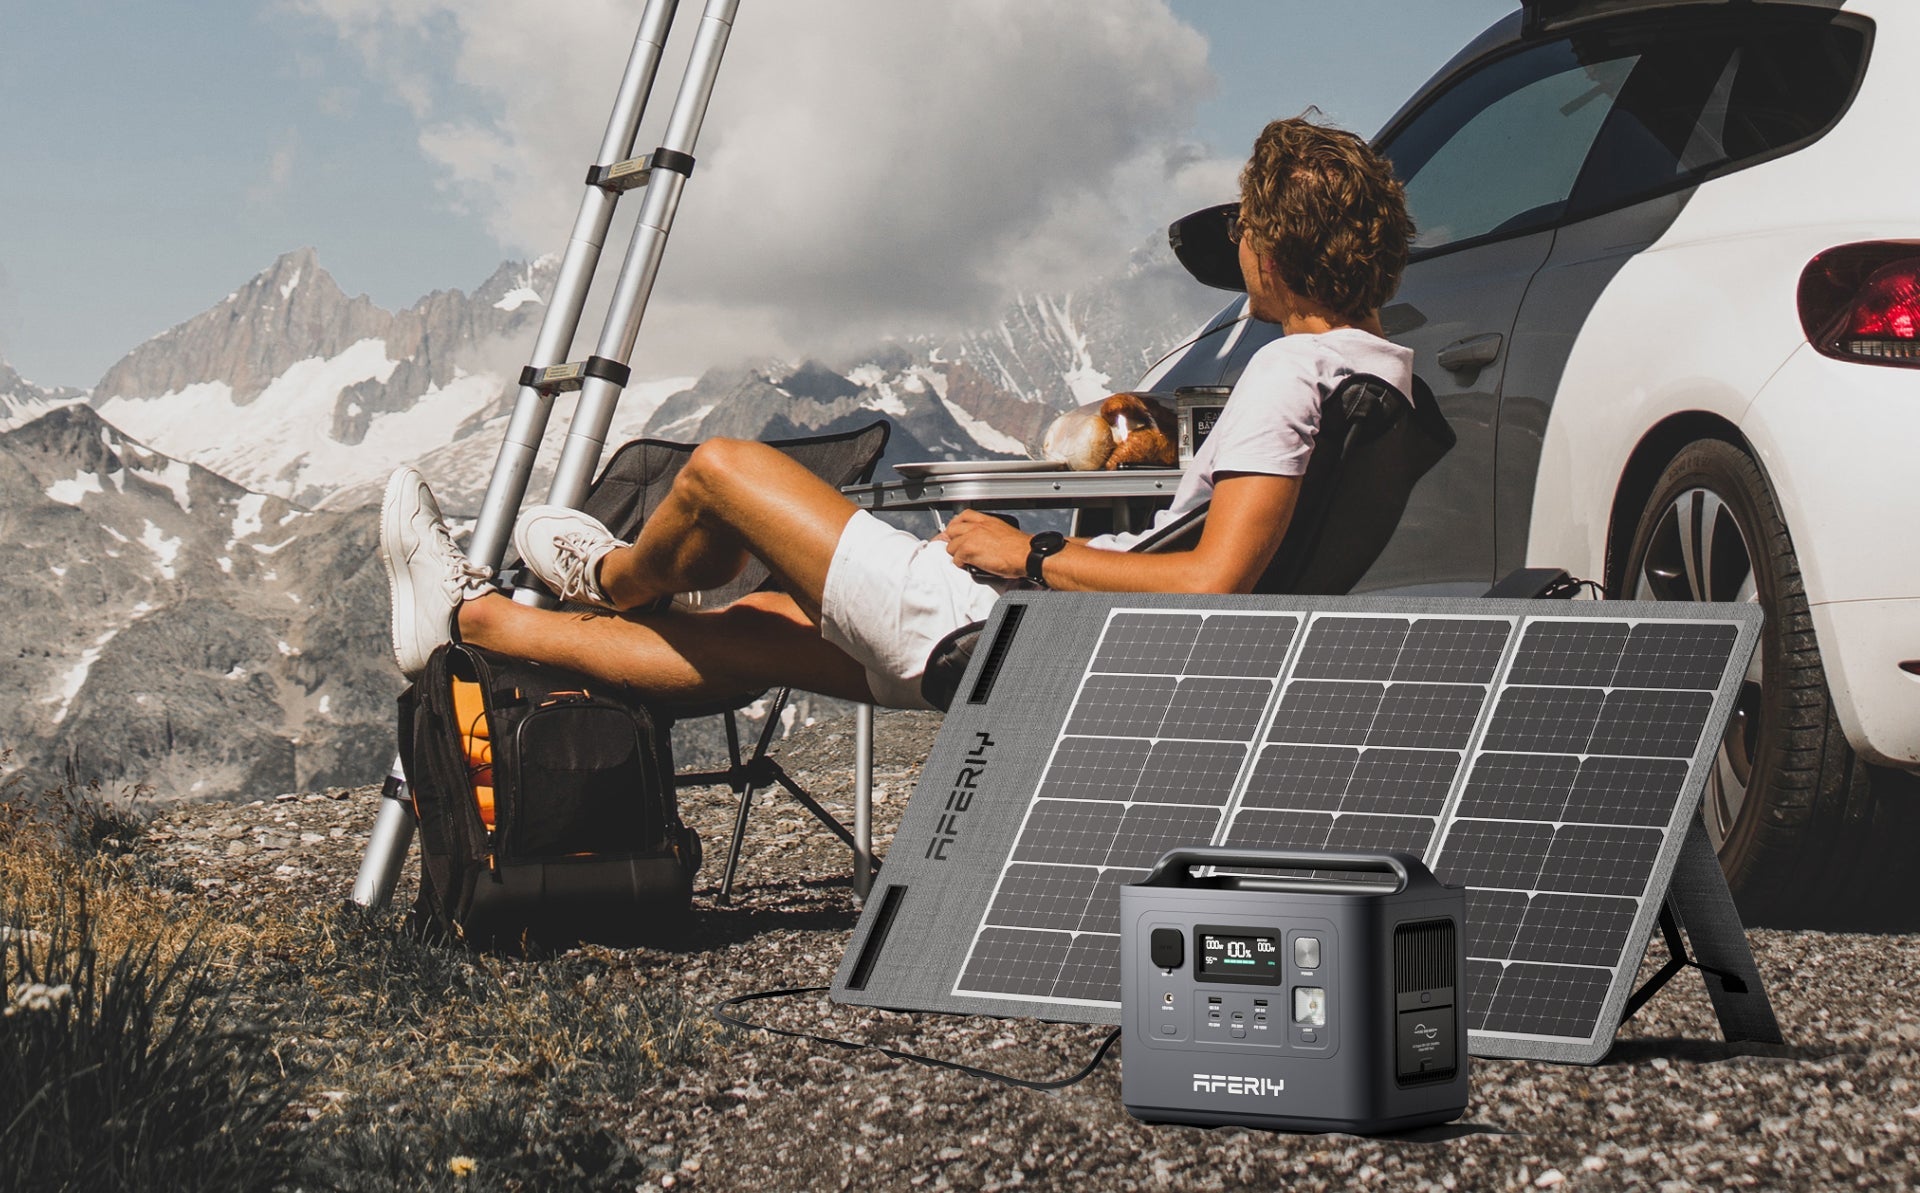 Folding solar panels ensure you have a reliable power source during emergencies.